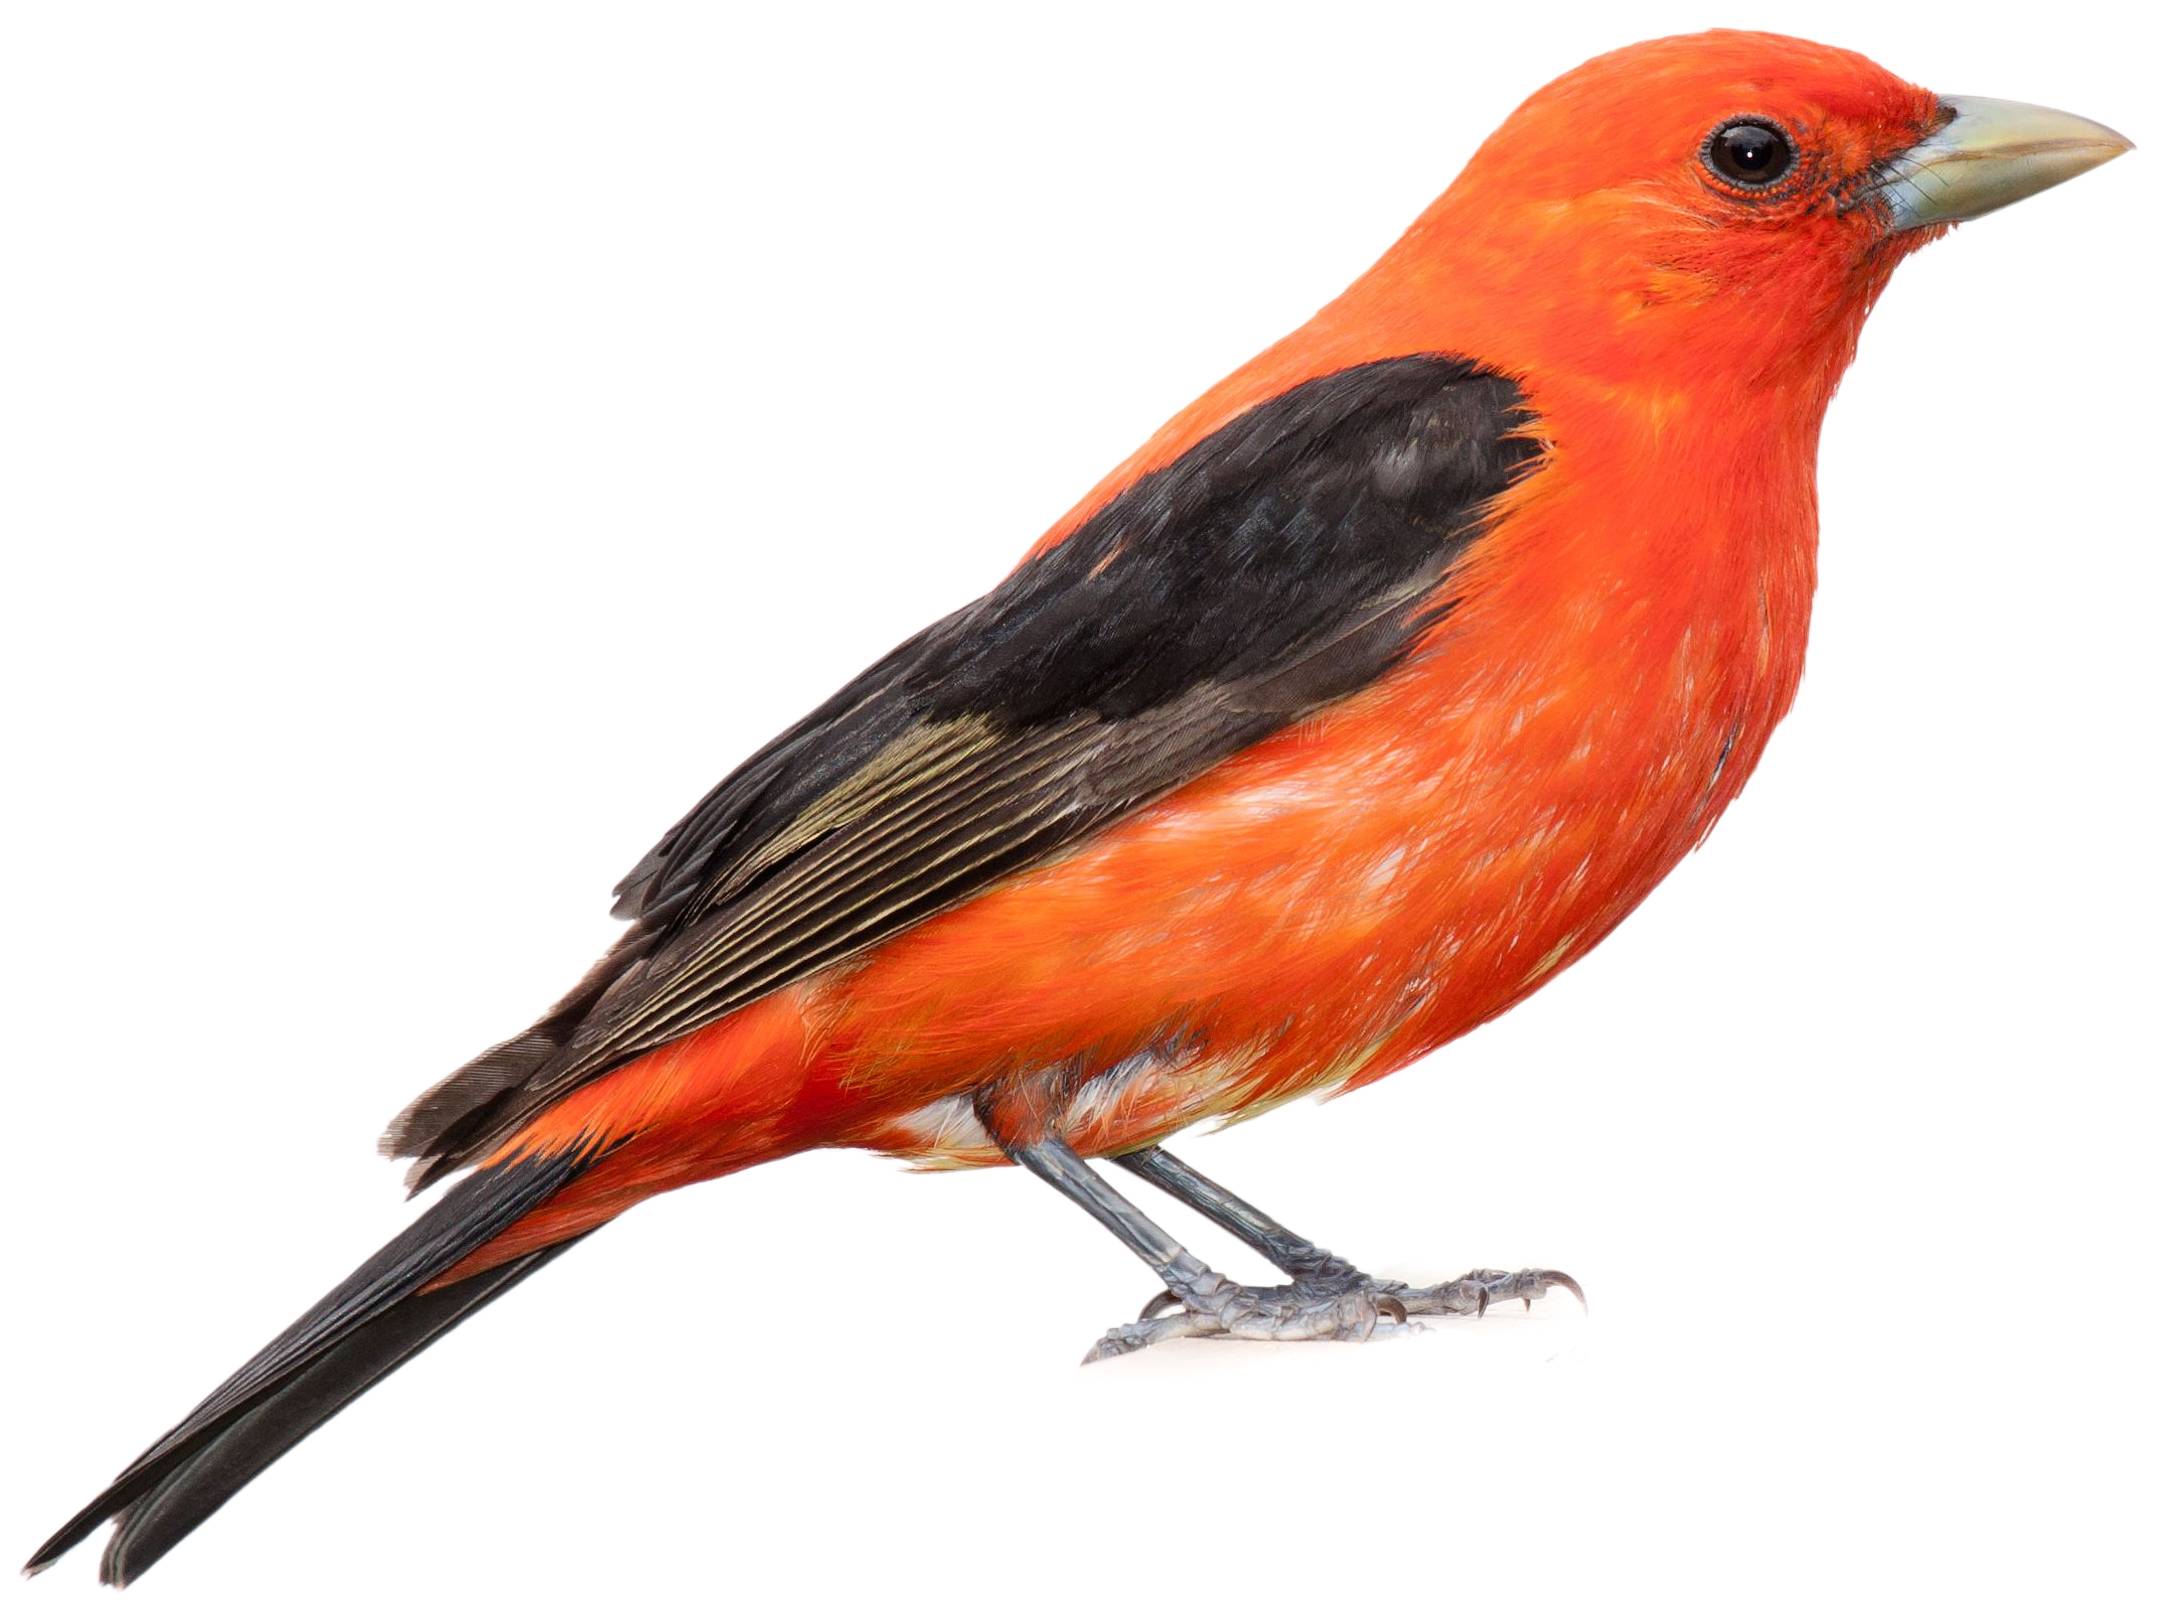 A photo of a Scarlet Tanager (Piranga olivacea), male